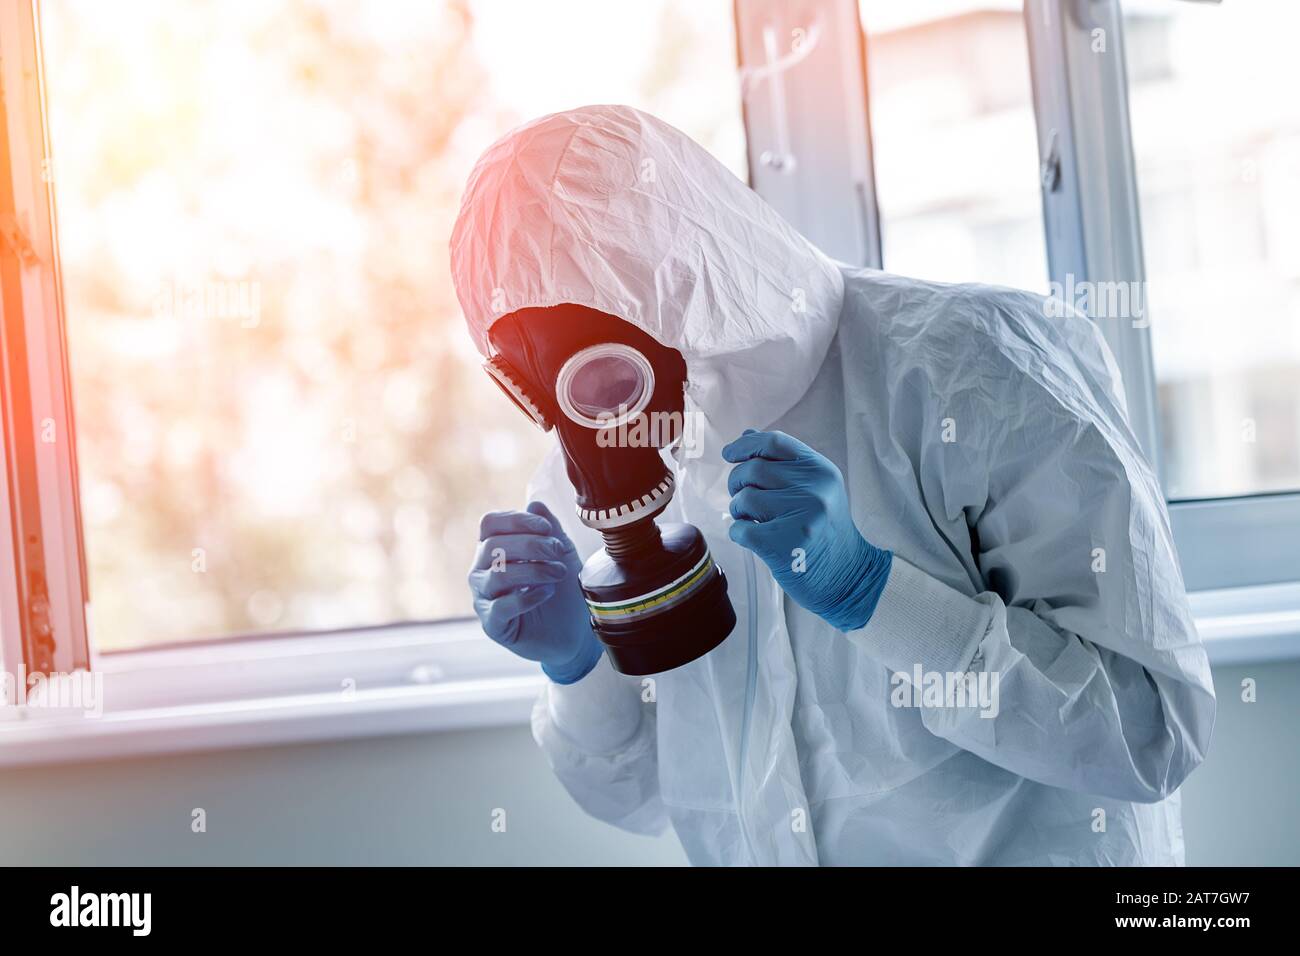 Man wearing protective biological suit and gas-mask due to mers coronavirus global pandemic warning and danger. Medic sphysician scientist make Stock Photo